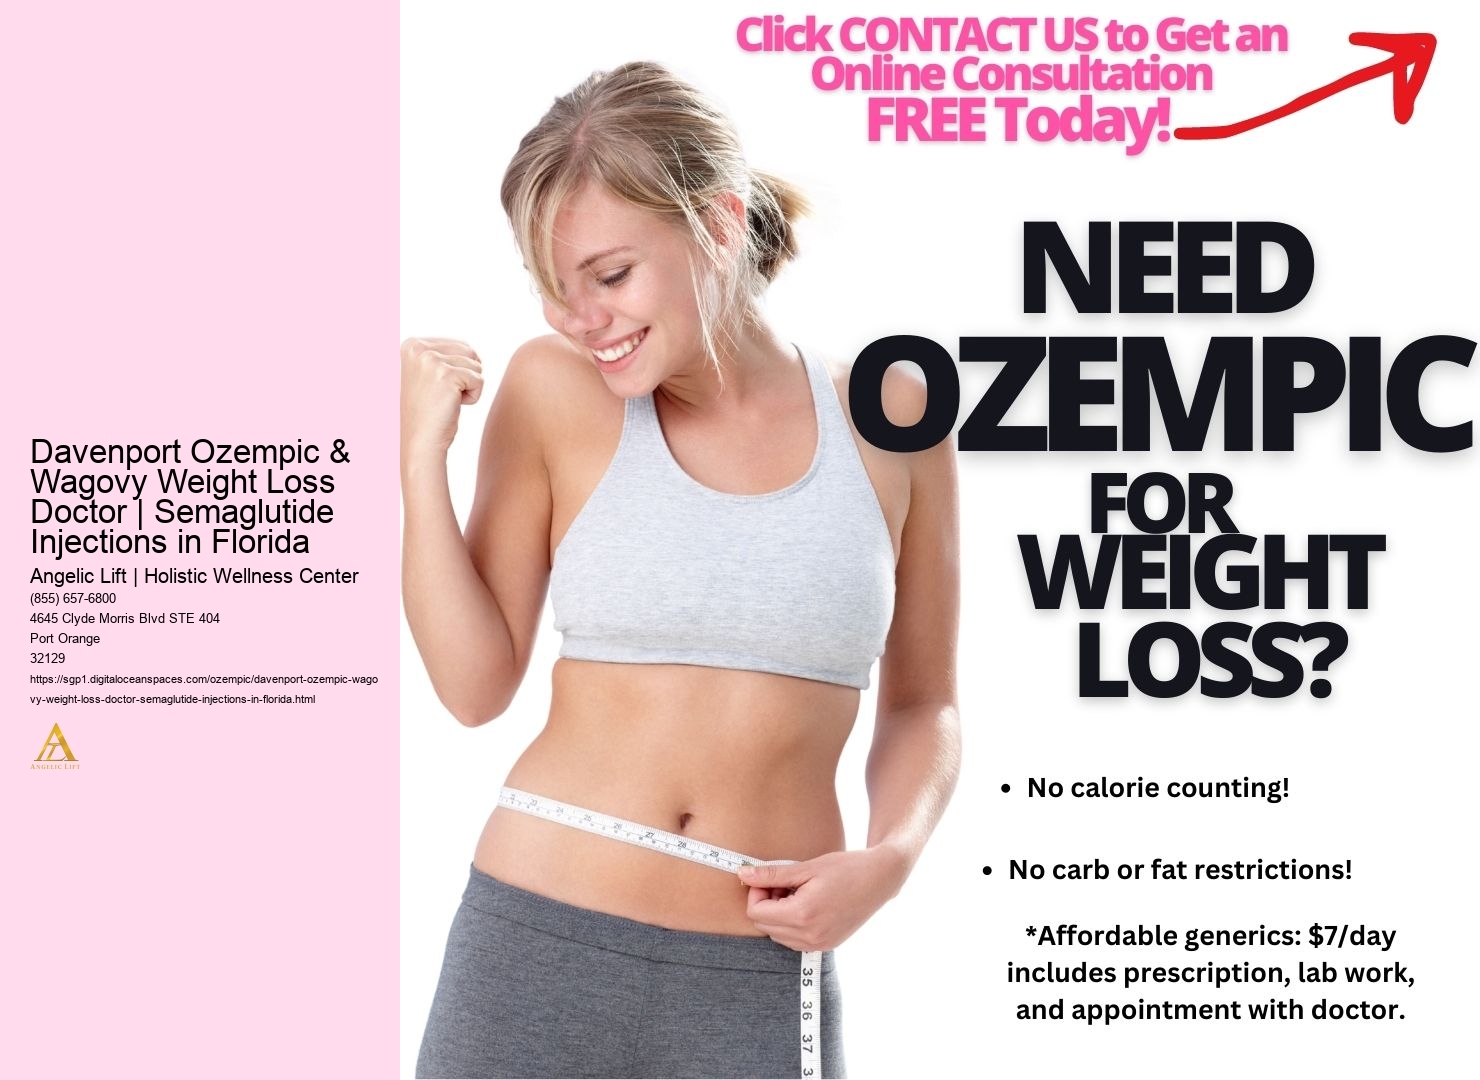 Davenport Ozempic & Wagovy Weight Loss Doctor | Semaglutide Injections in Florida